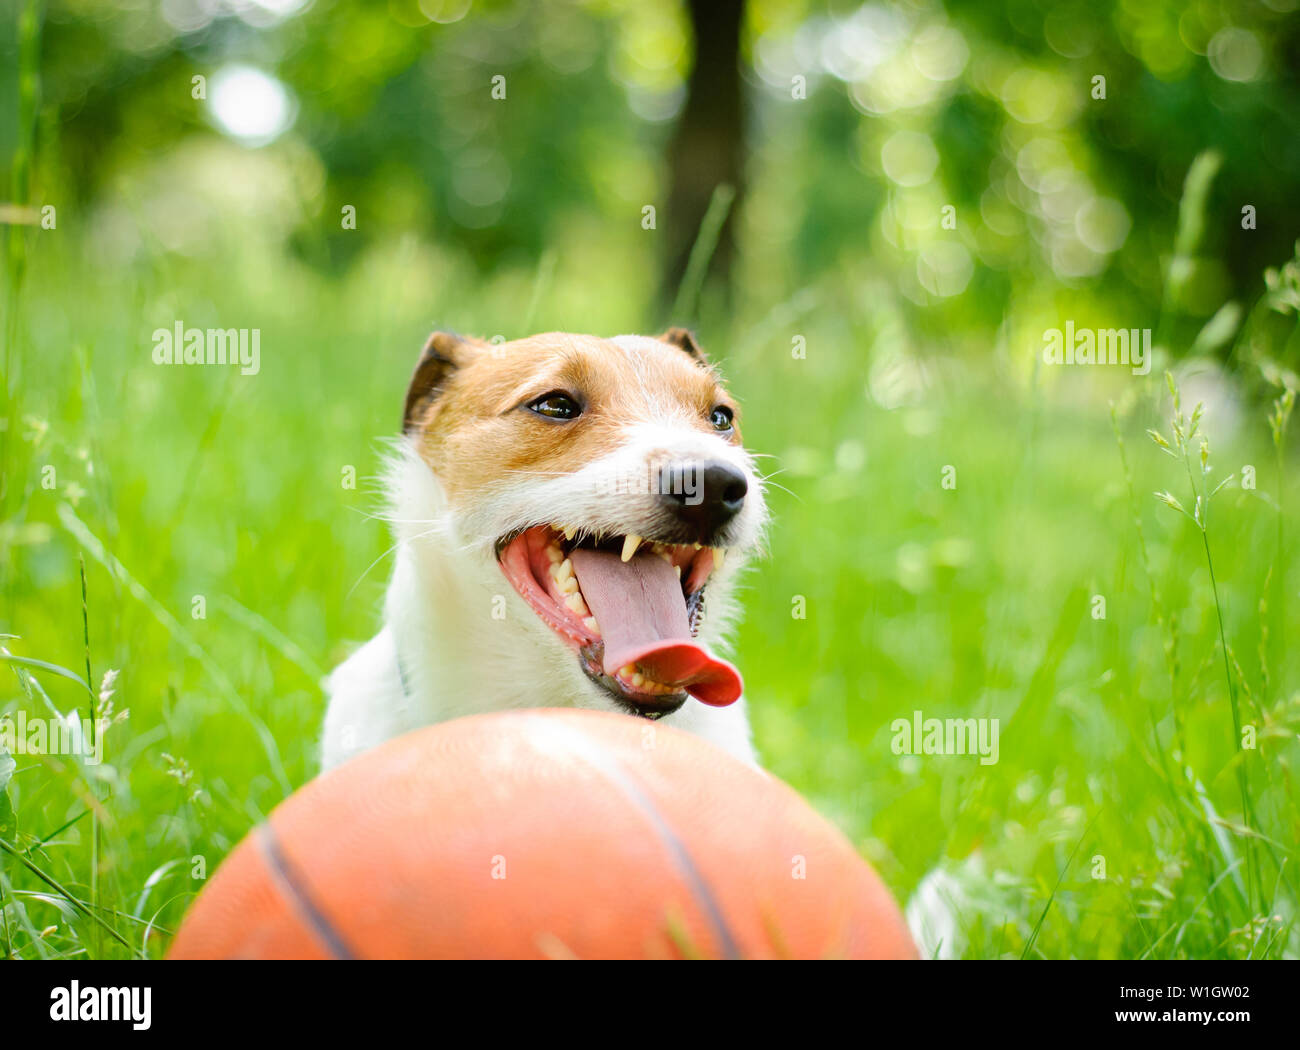 Summer portrait of tired Jack Russell Terrier dog with basketball ball Stock Photo